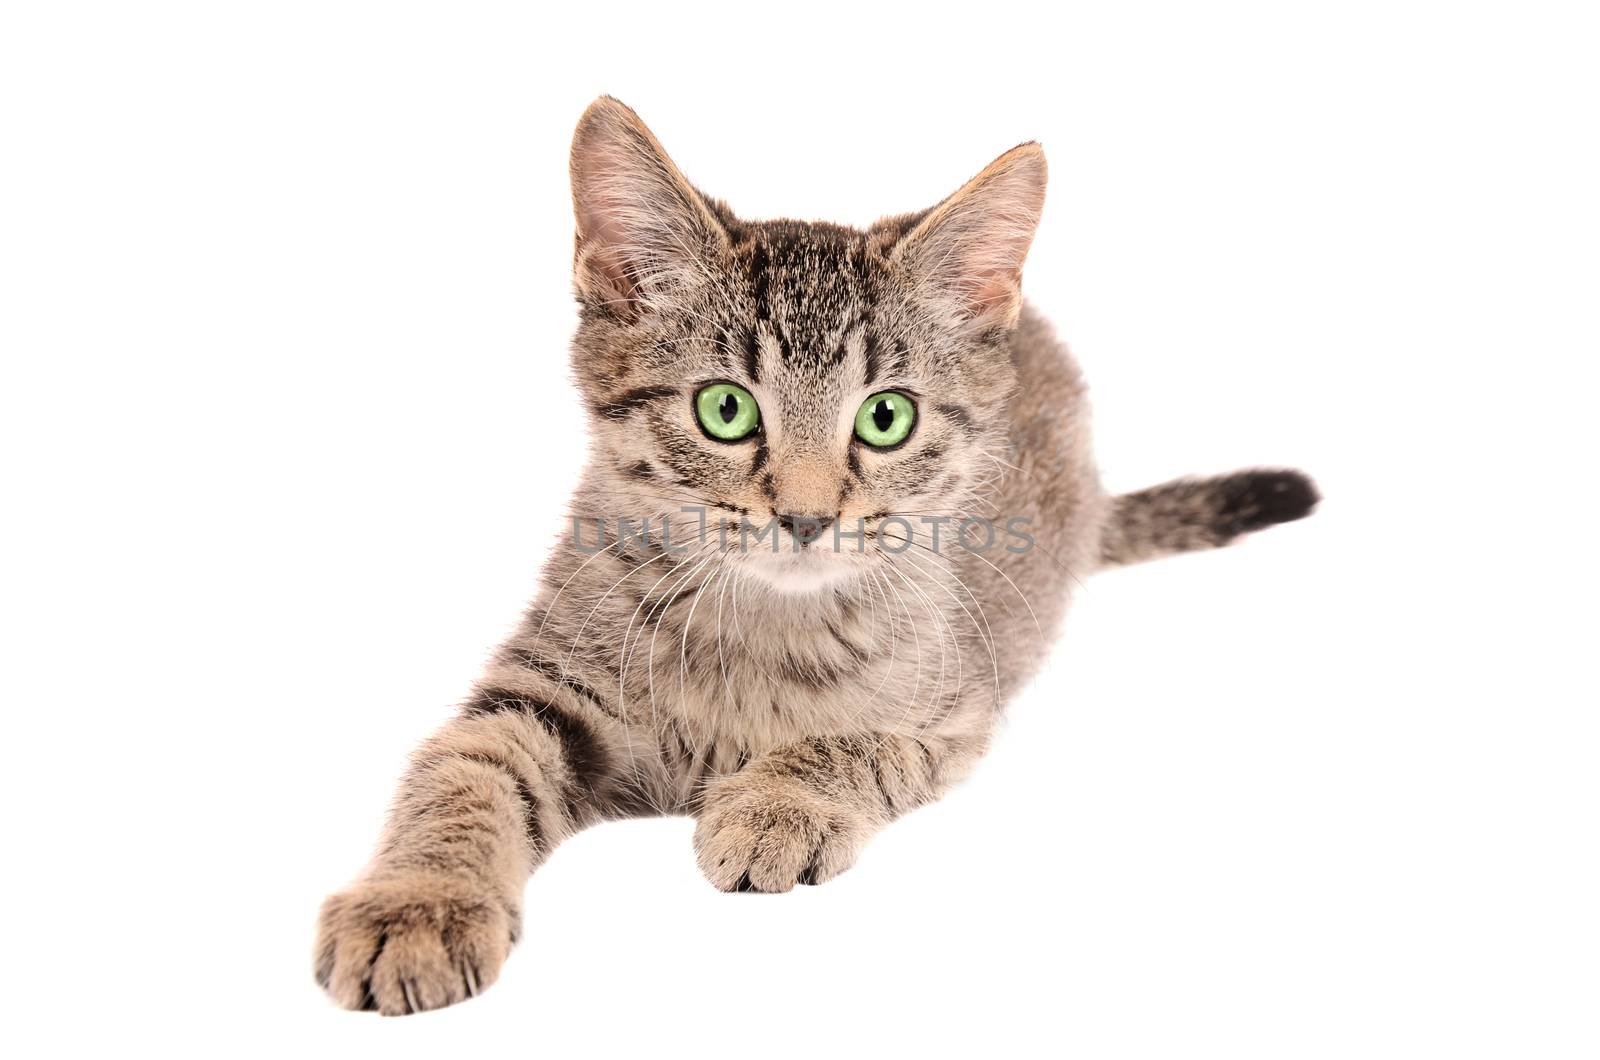 A tabby kitten reaching out on white